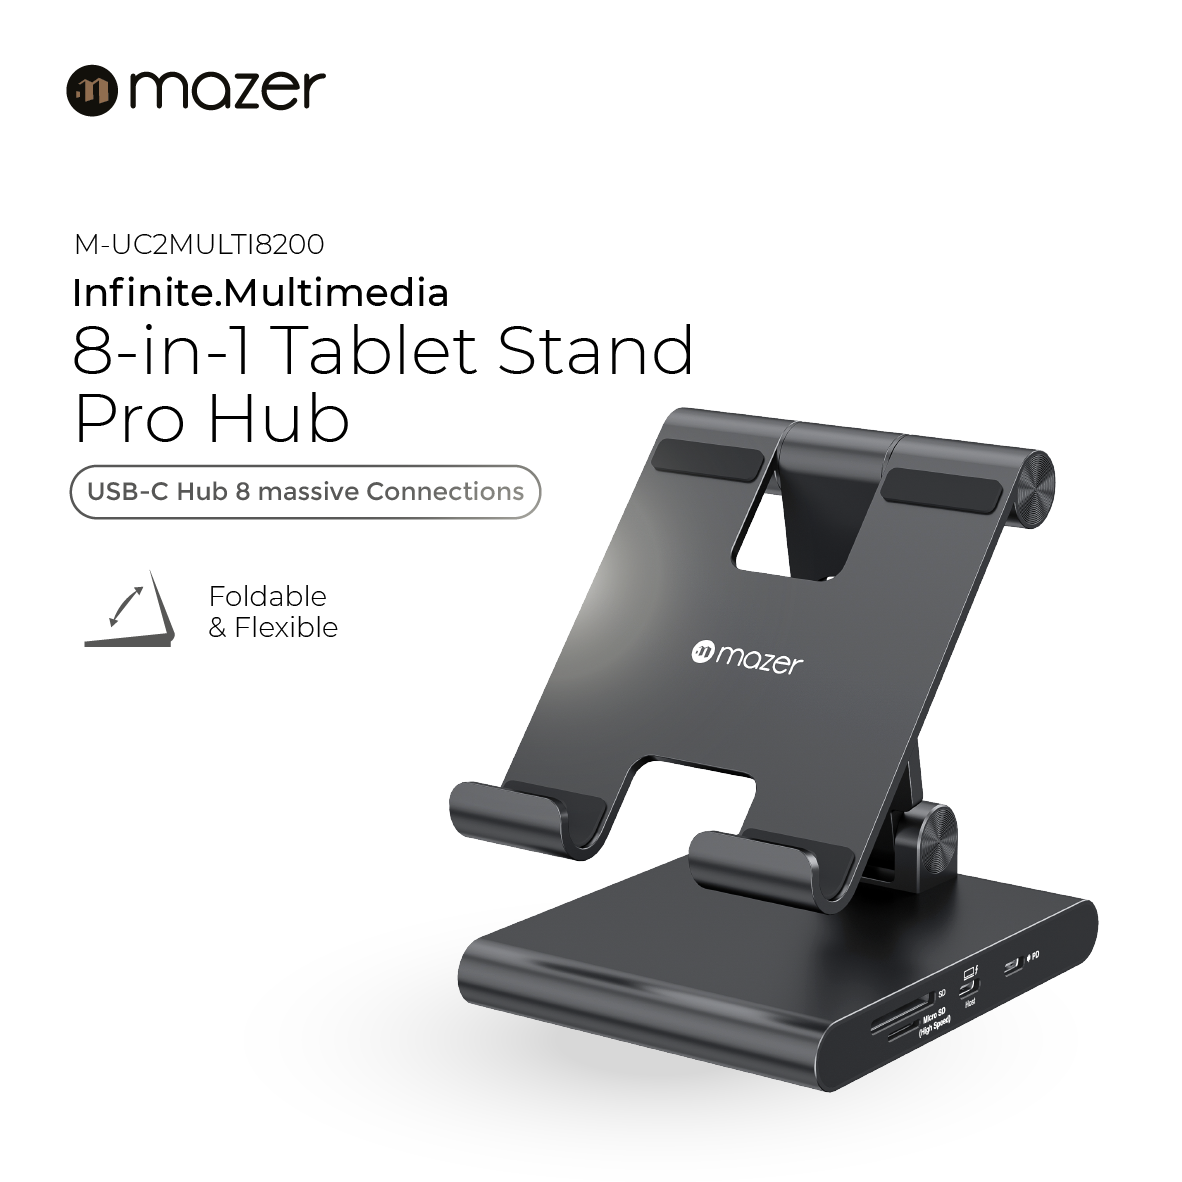 Mazer 8200 USB-C Hub (8-in-1, Tablet Stand)